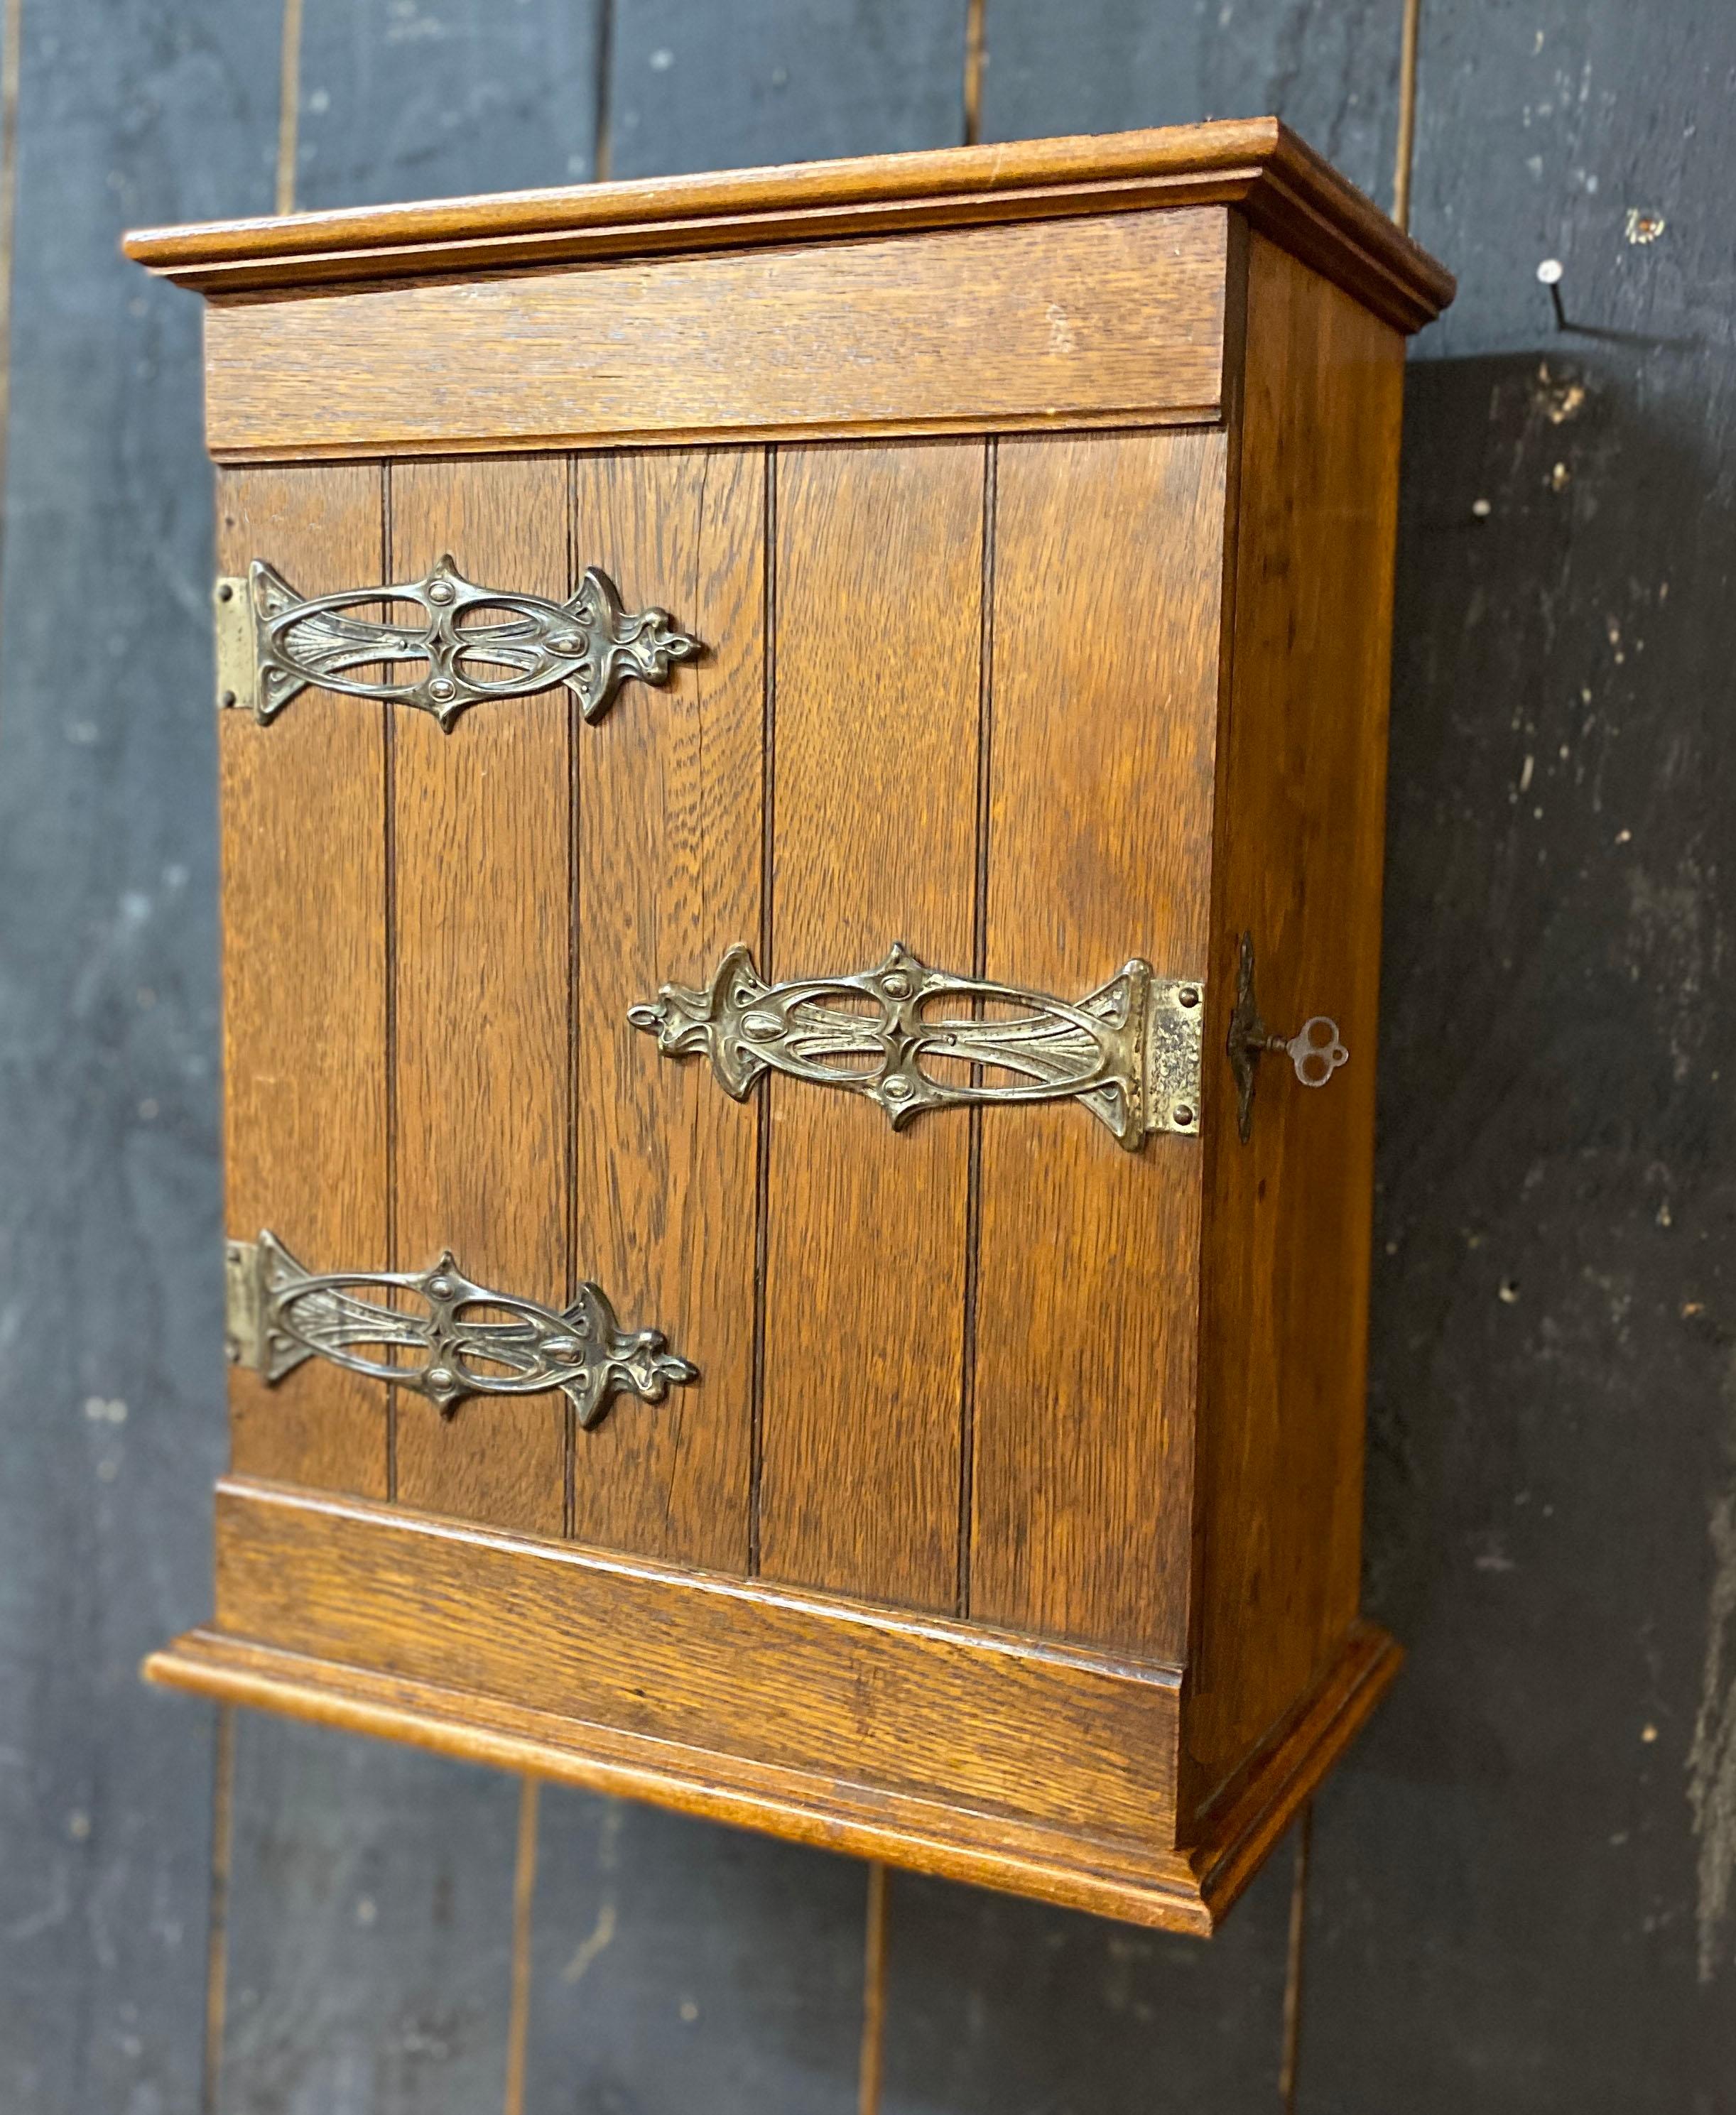 European charming arts and crafts wall cabinet circa 1900 with its original key For Sale